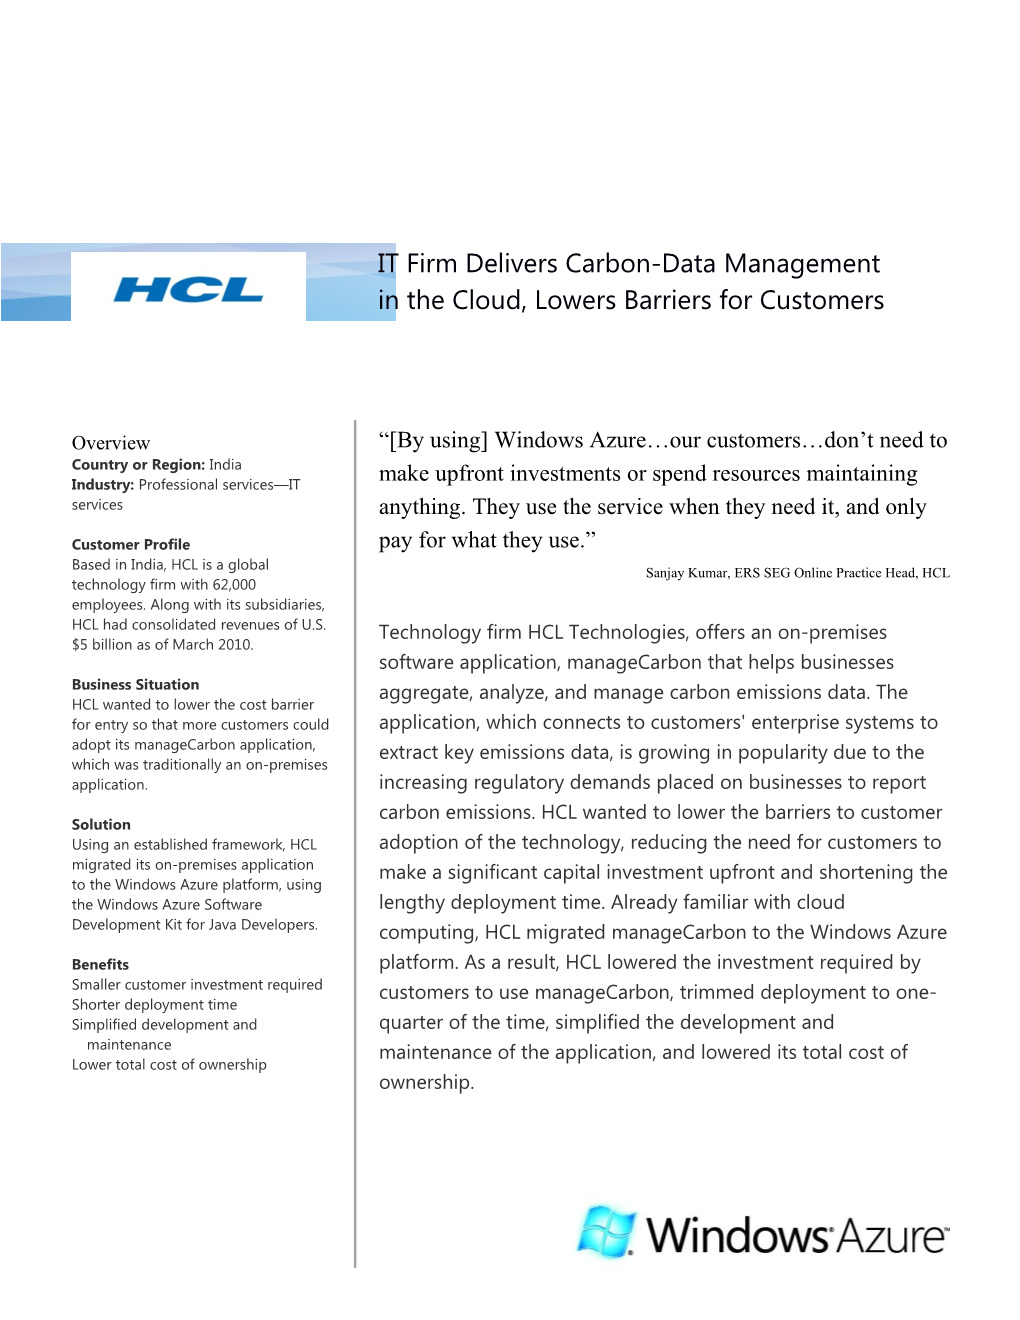 IT Firm Delivers Carbon-Data Management in the Cloud, Lowers Barriers for Customers